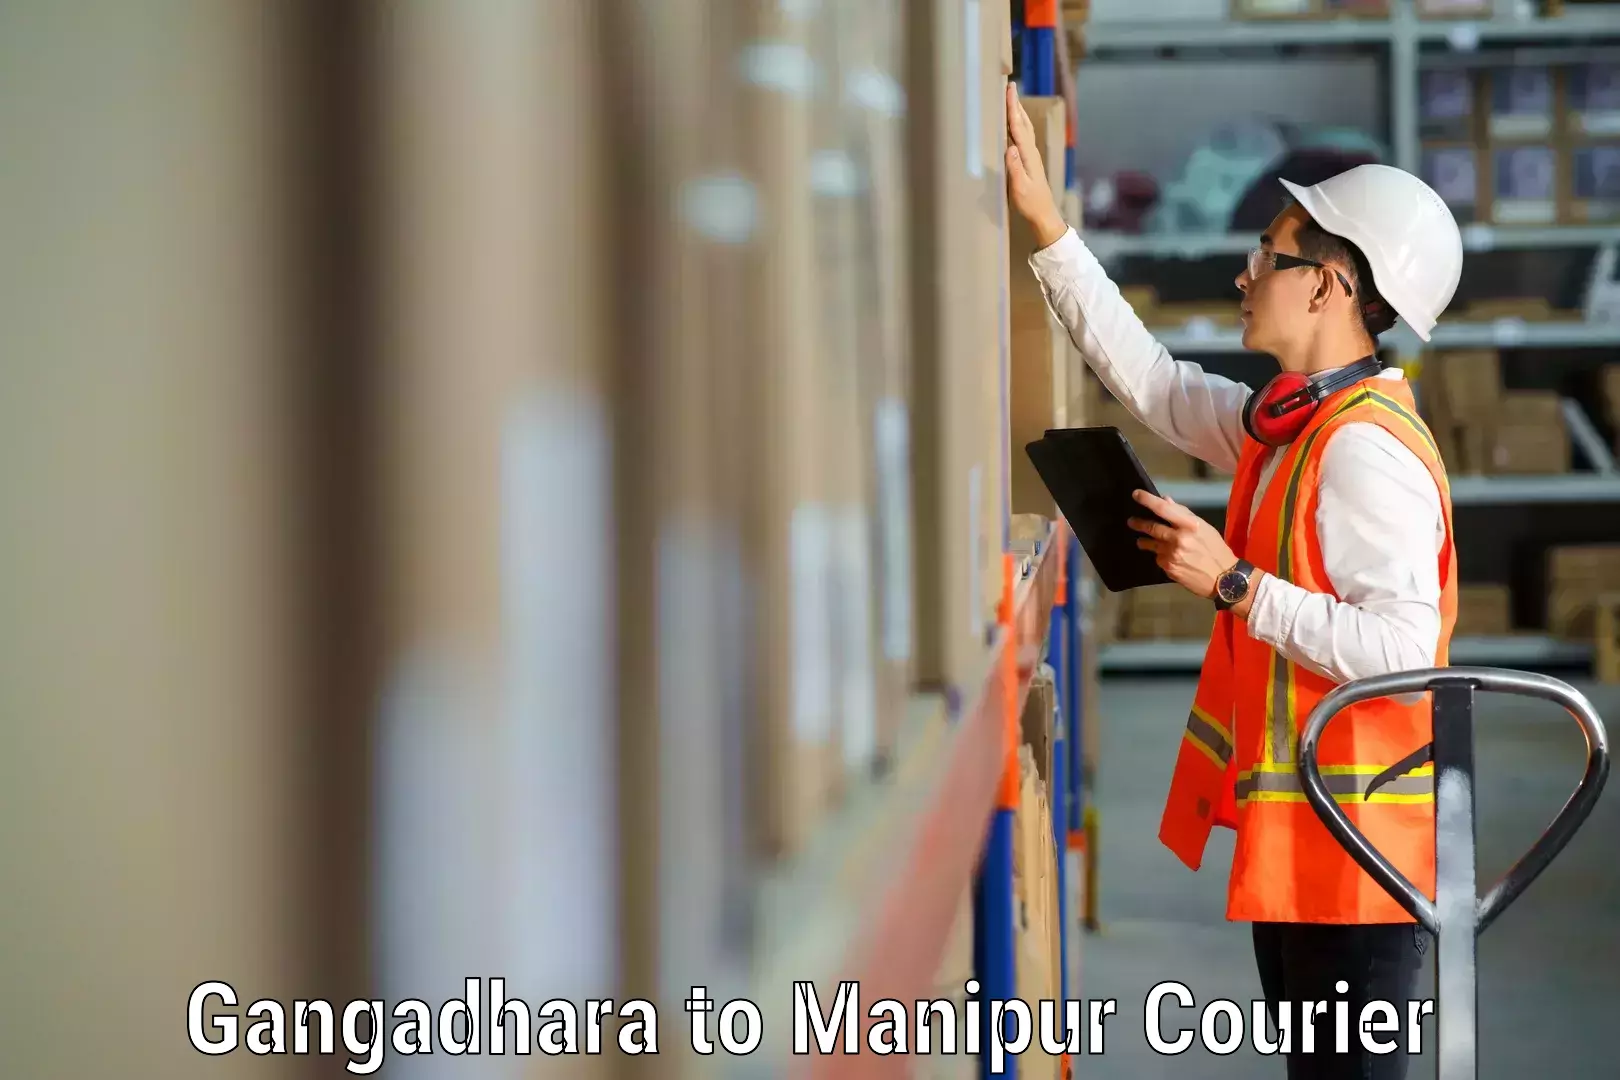 Furniture moving specialists Gangadhara to Manipur